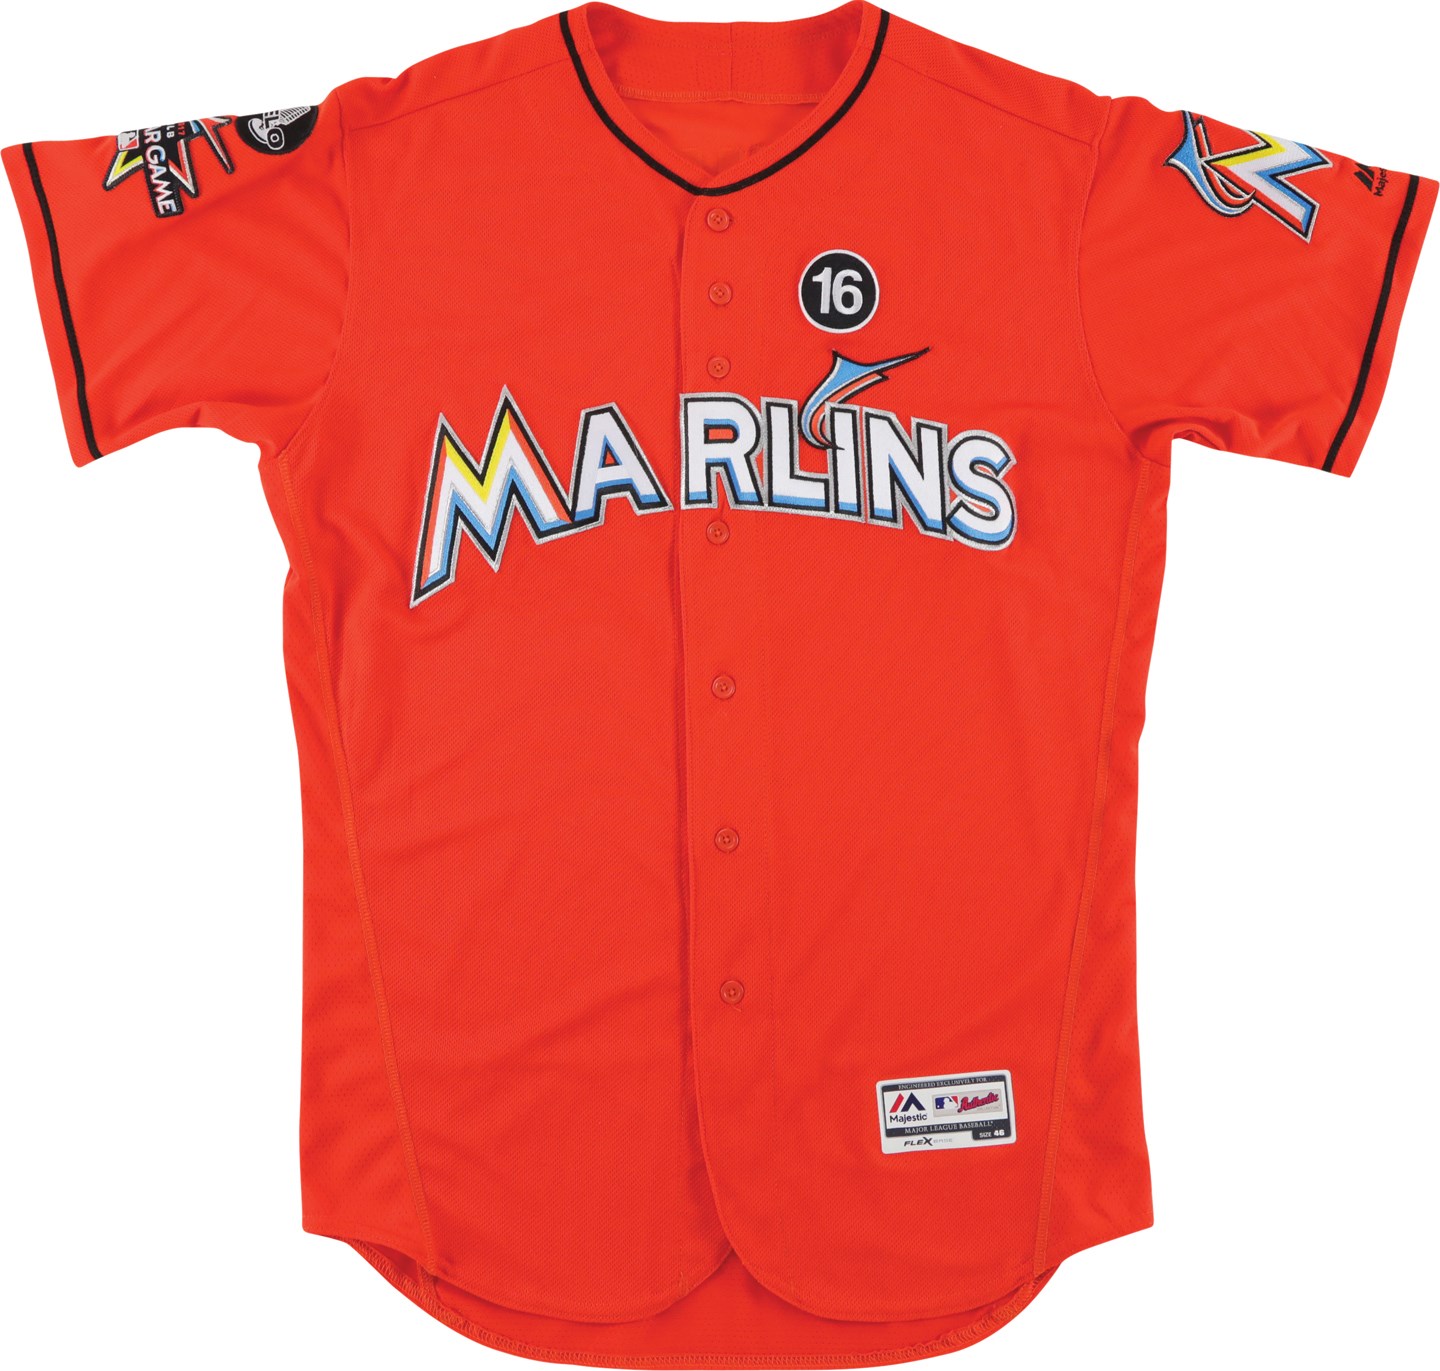 - 2017 Don Mattingly Miami Marlins Signed Game Worn Jersey (MEARS A10)